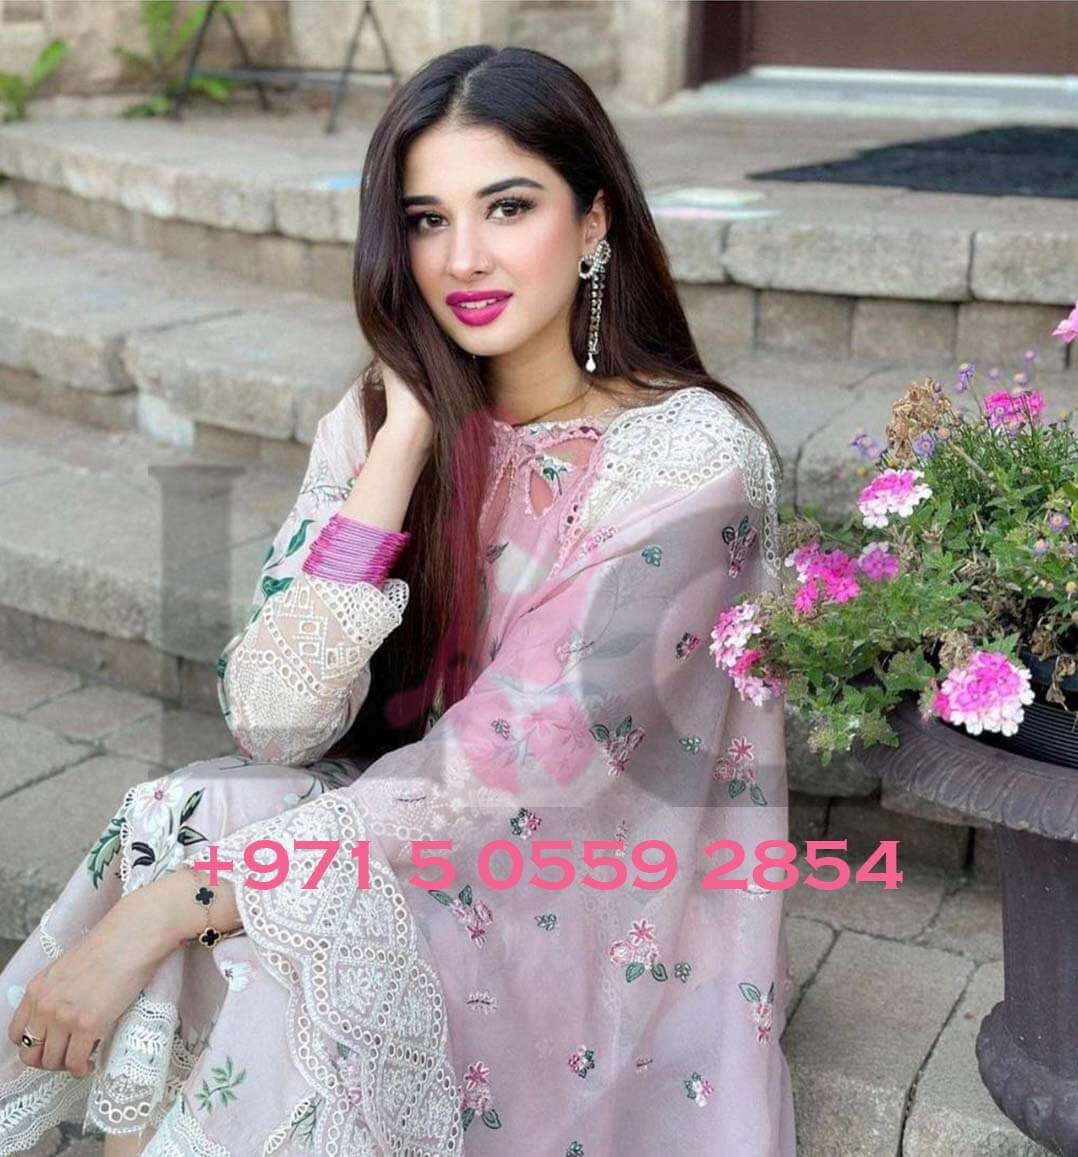 Indian Call Girls Services In Dubai